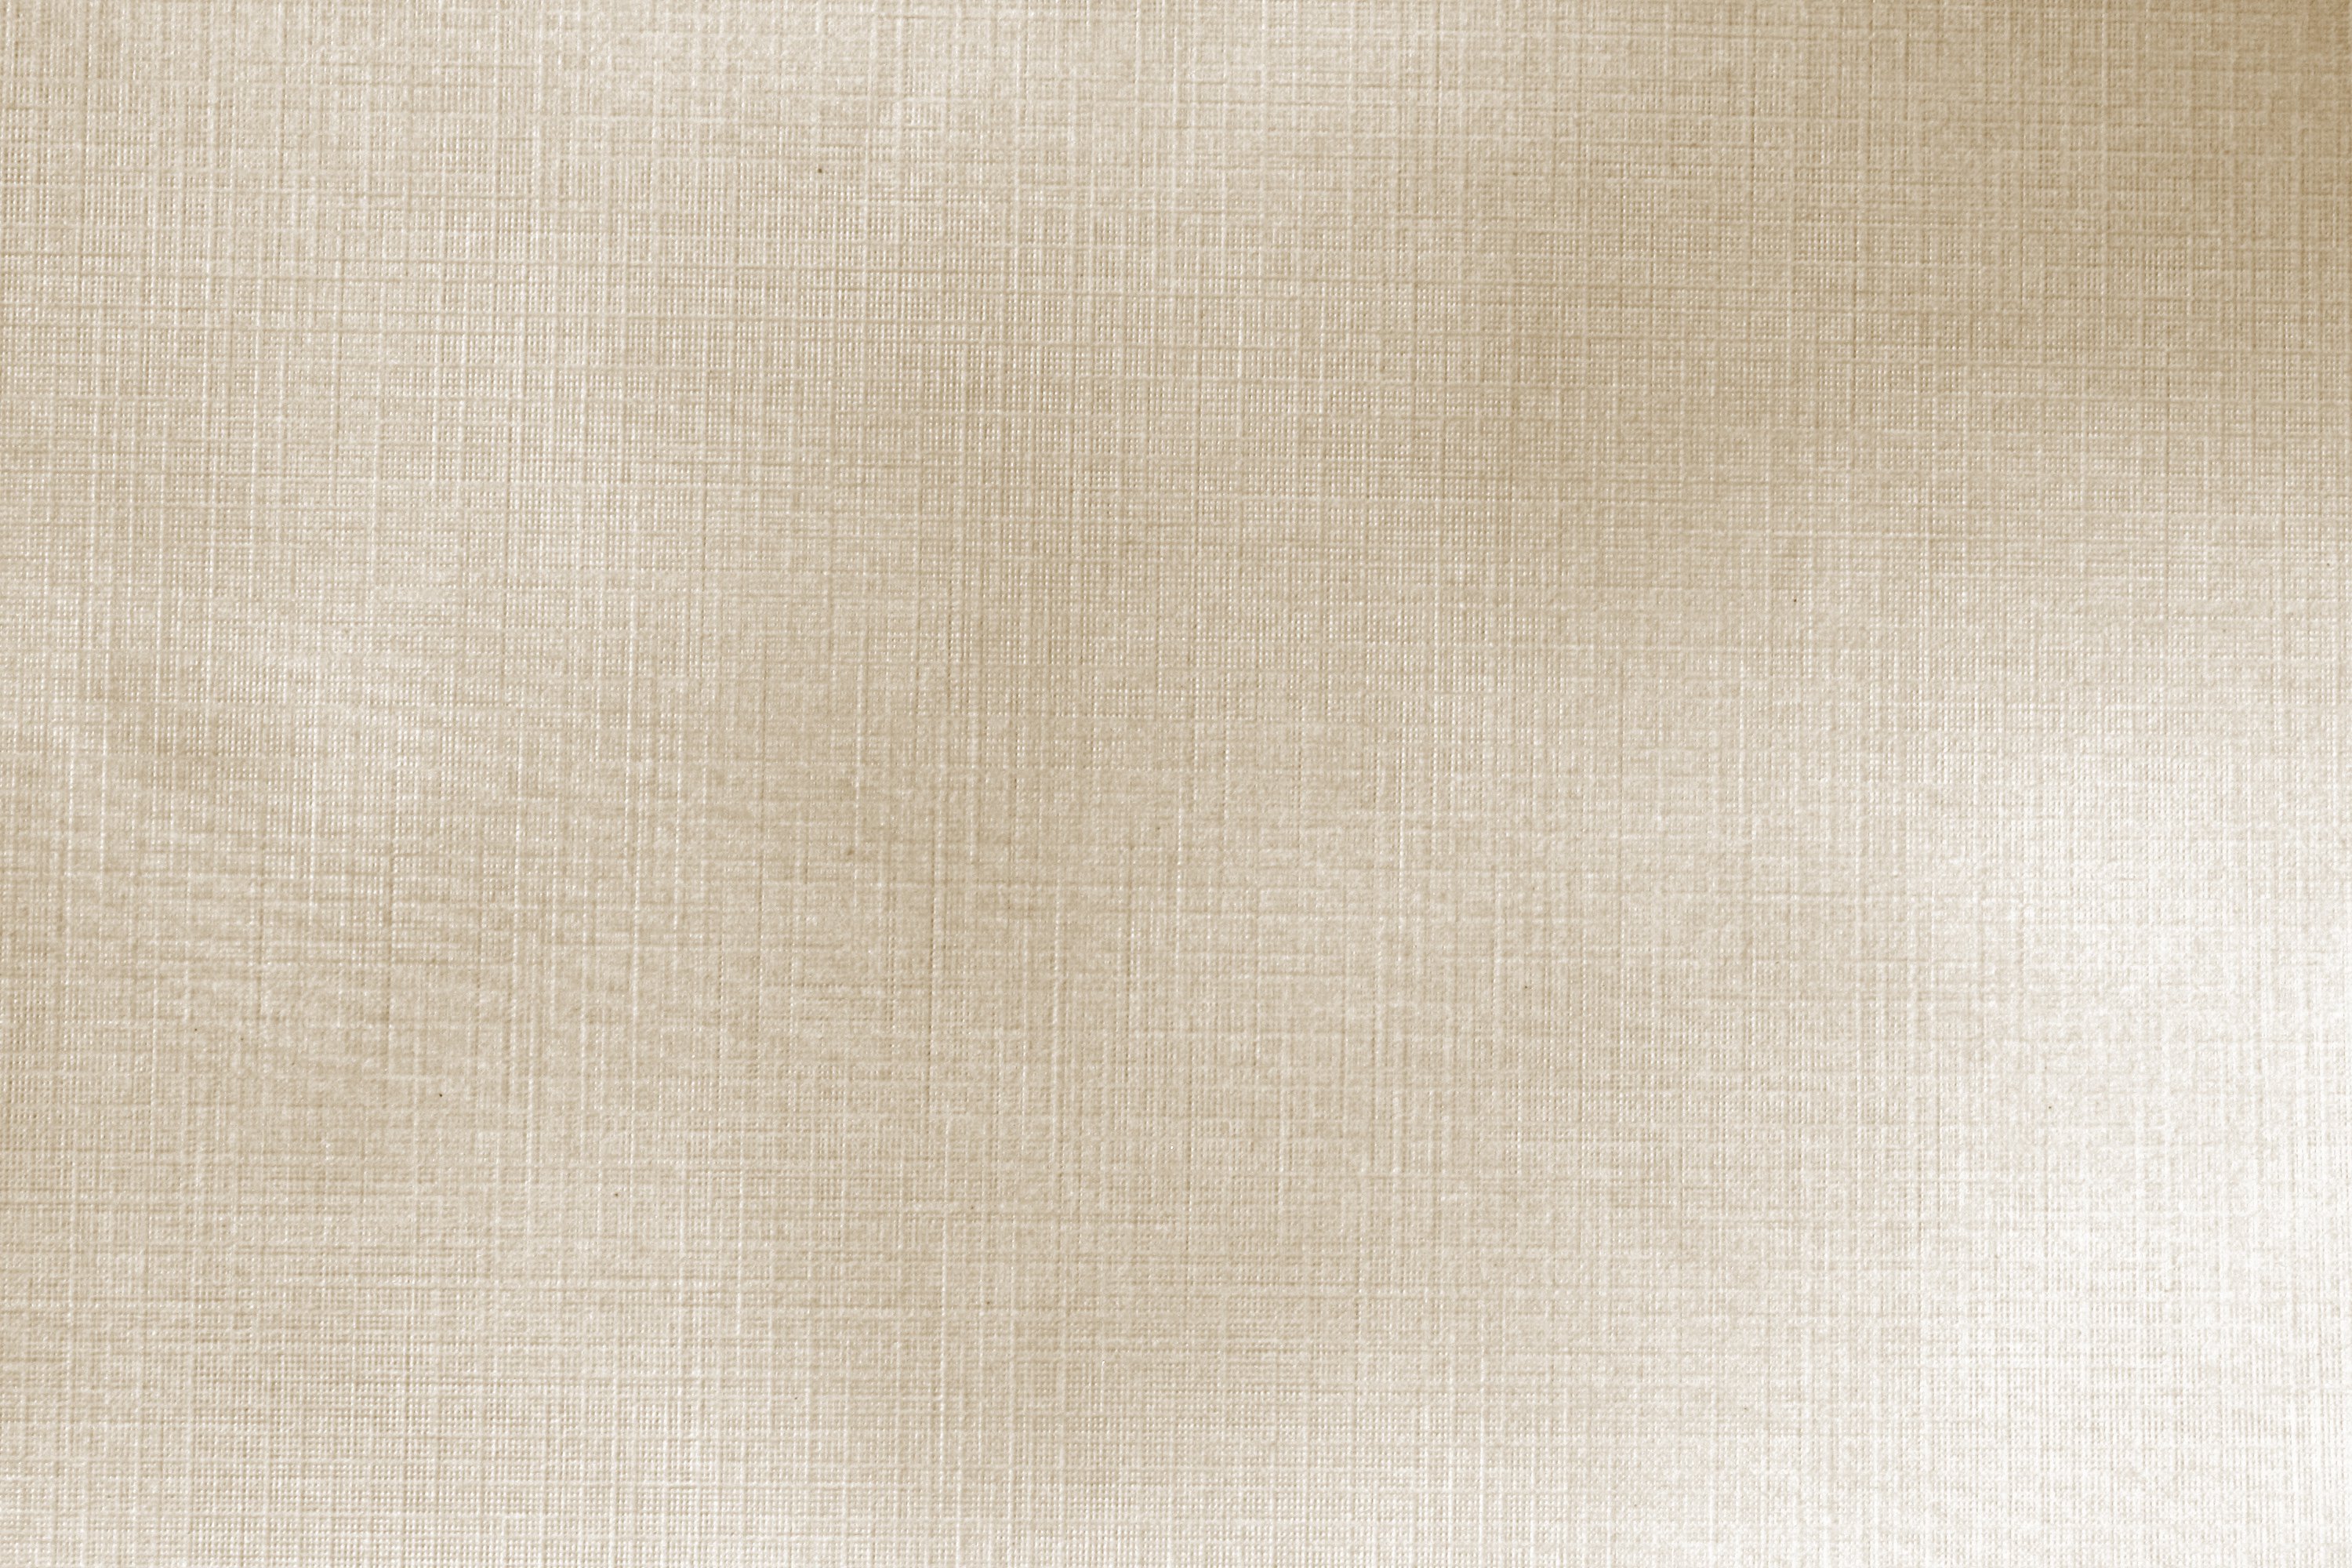 Linen Paper Texture High Resolution Photo Dimensions